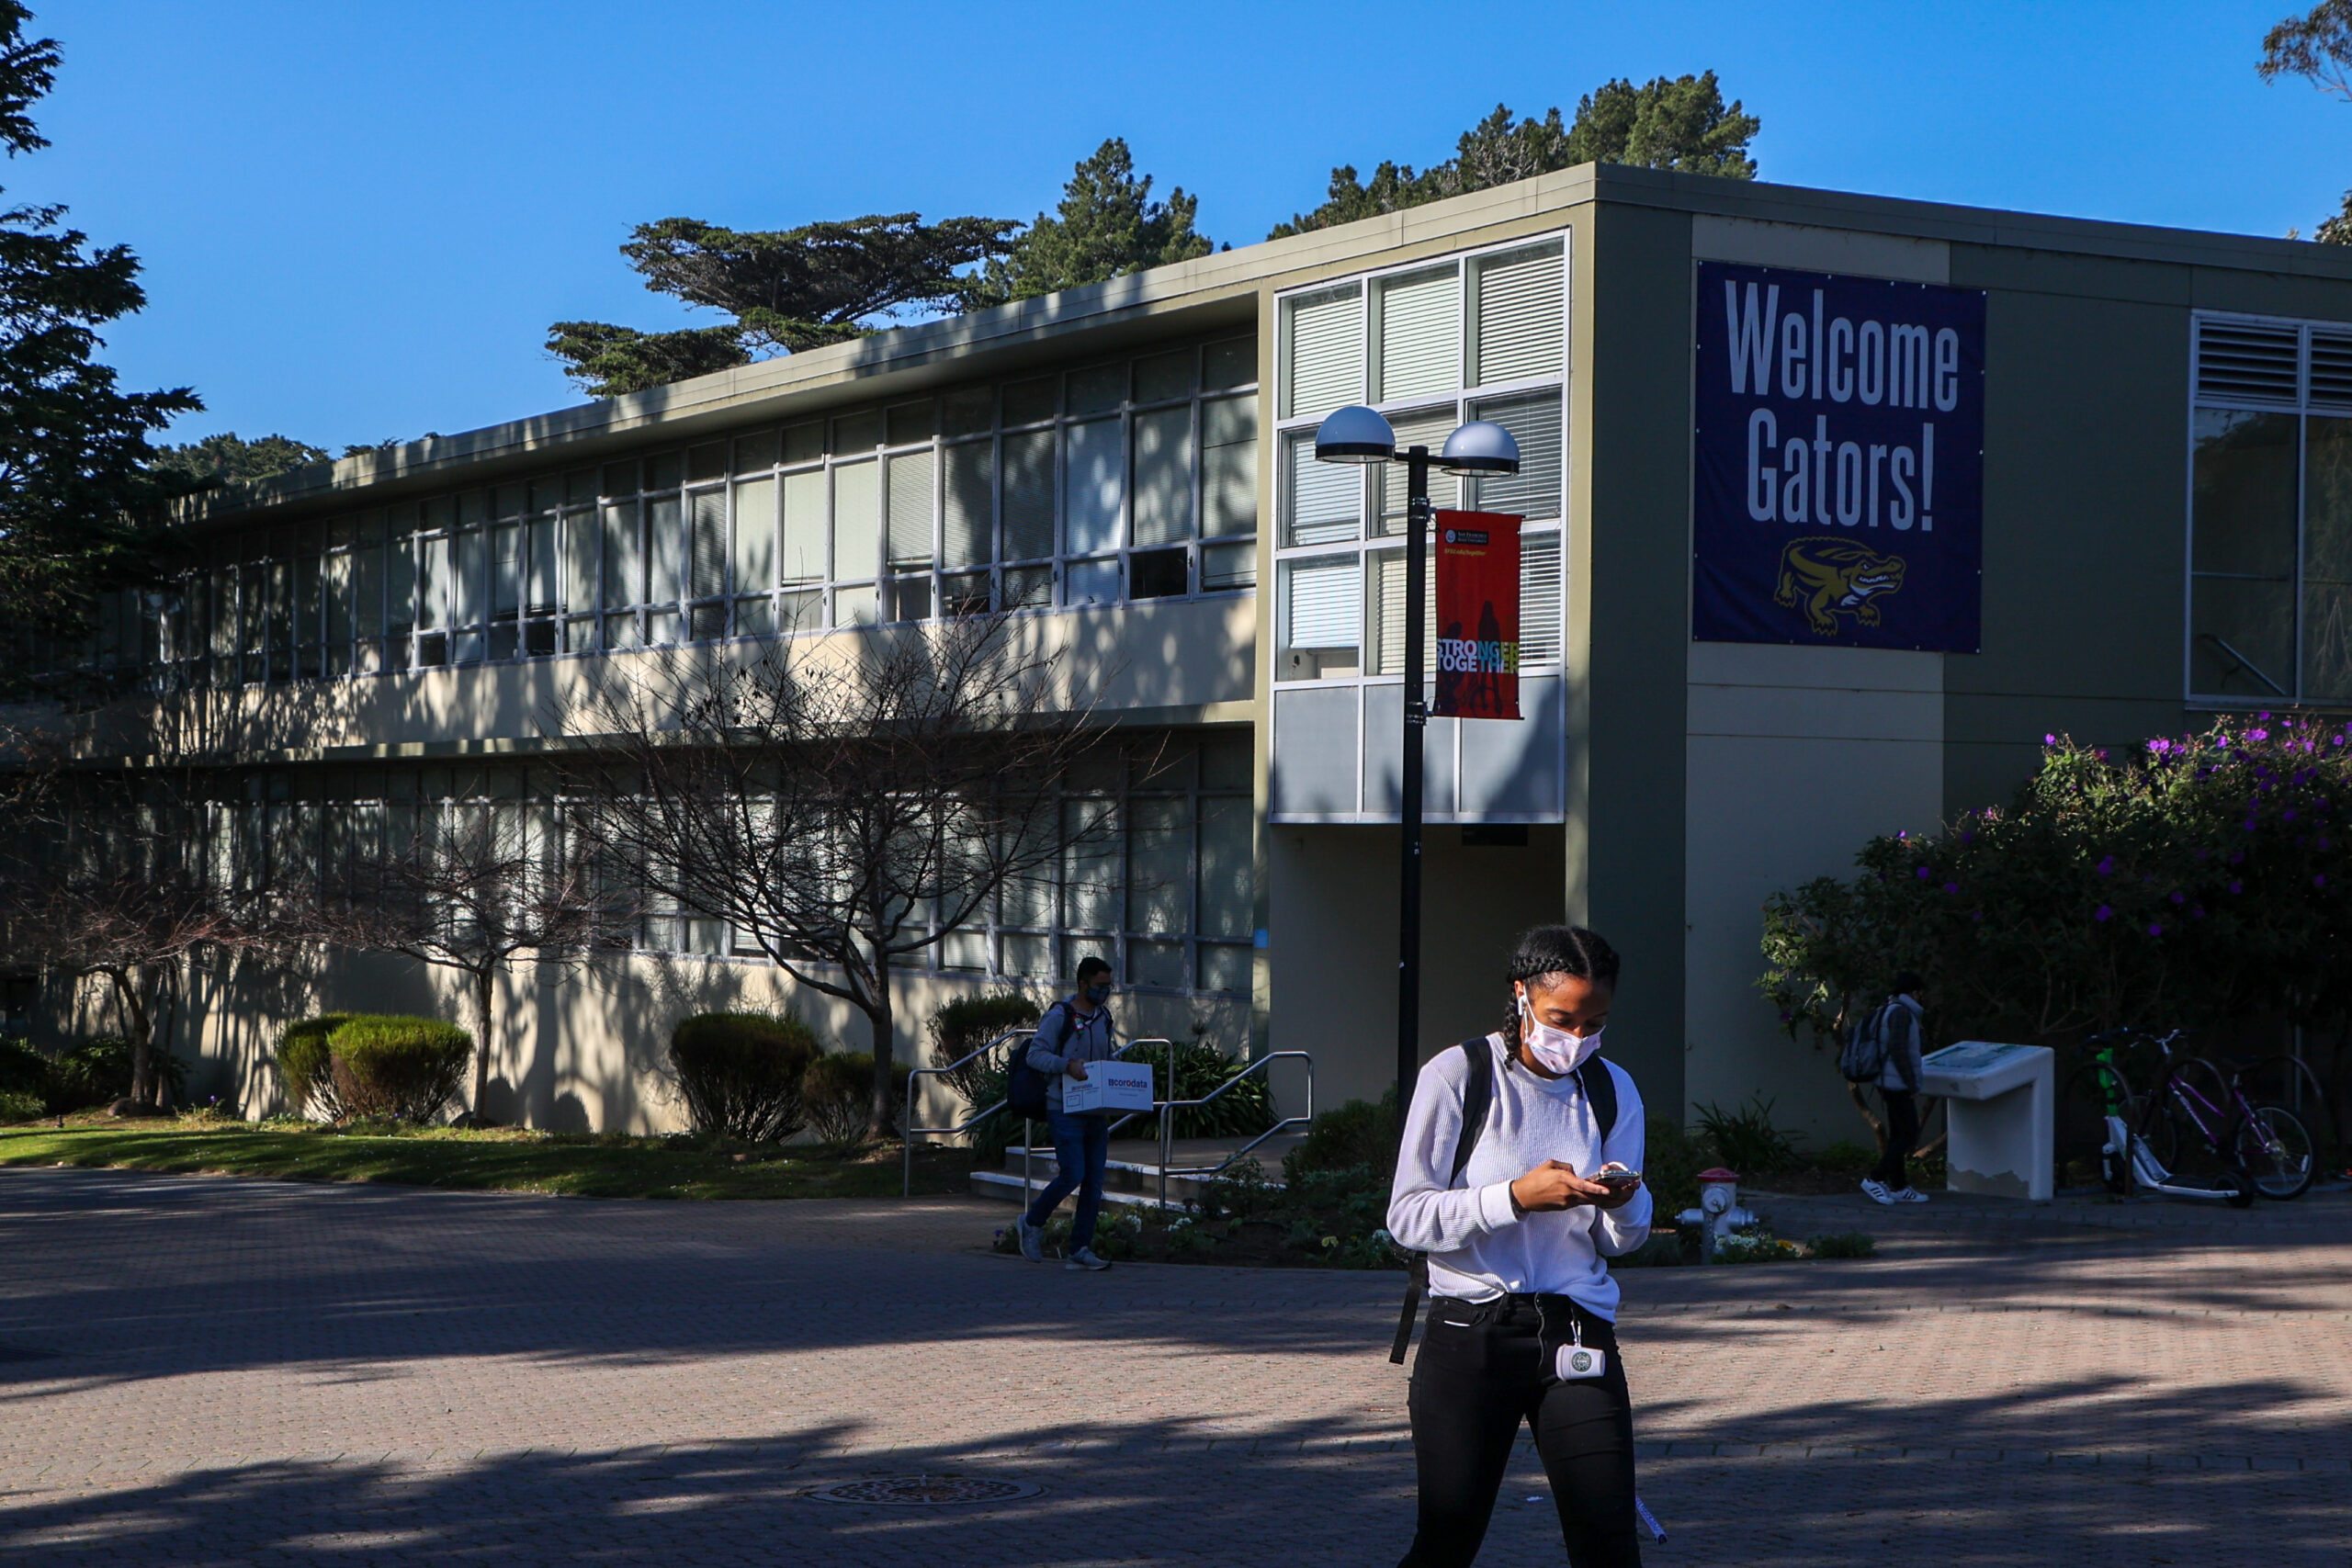 Students make their way around the San Francisco State University (SFSU) campus on January 26, 2022.